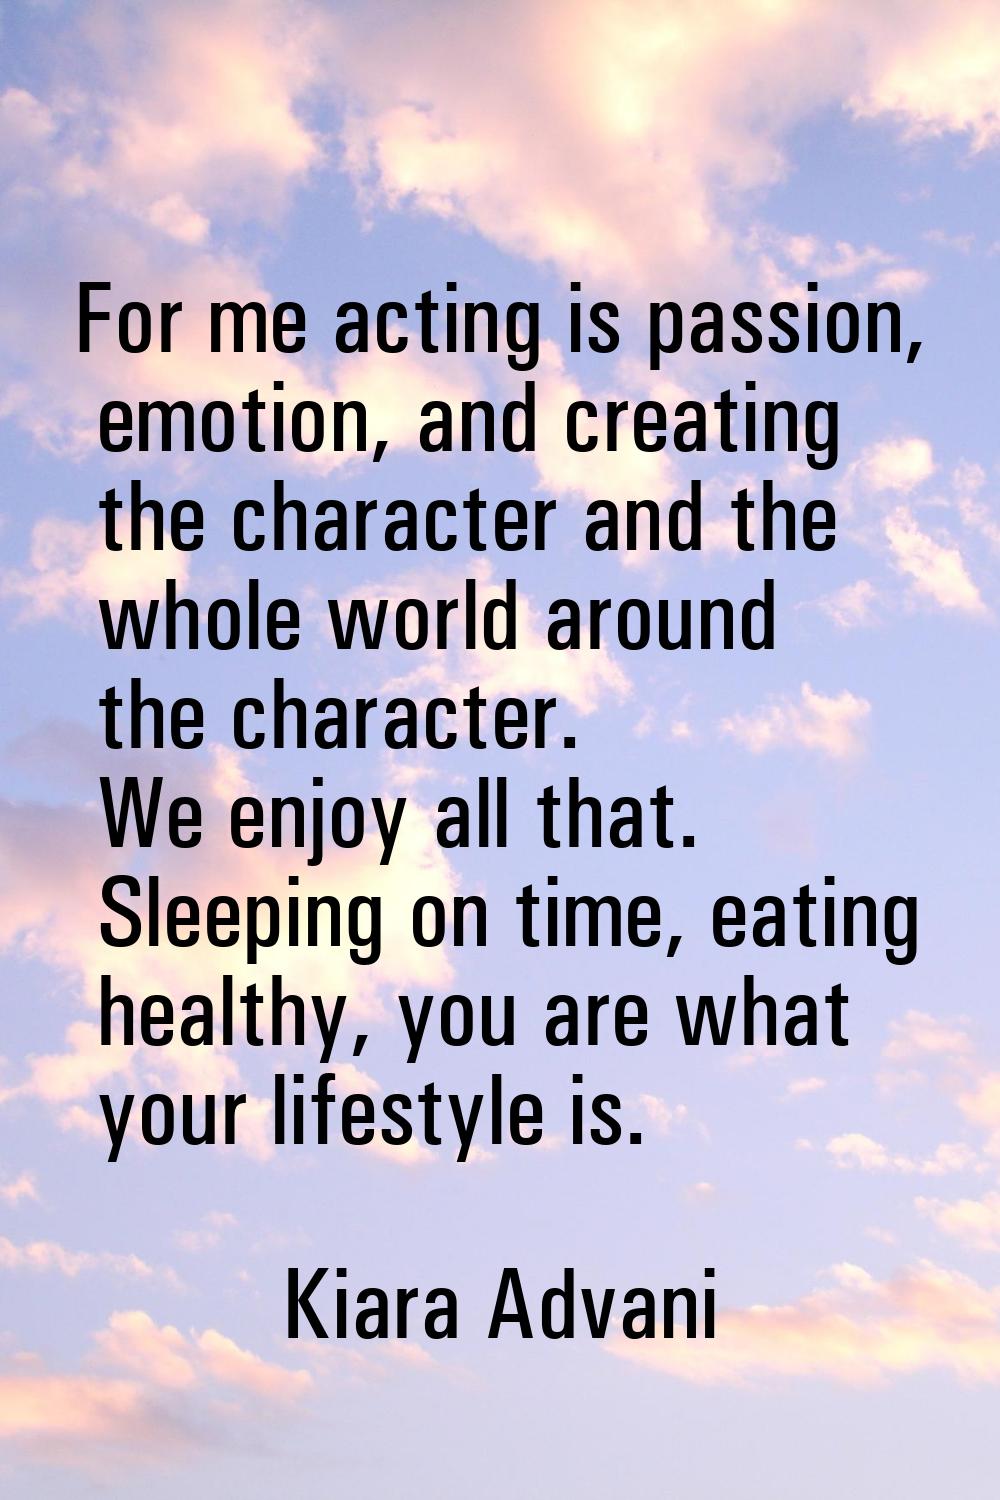 For me acting is passion, emotion, and creating the character and the whole world around the charac